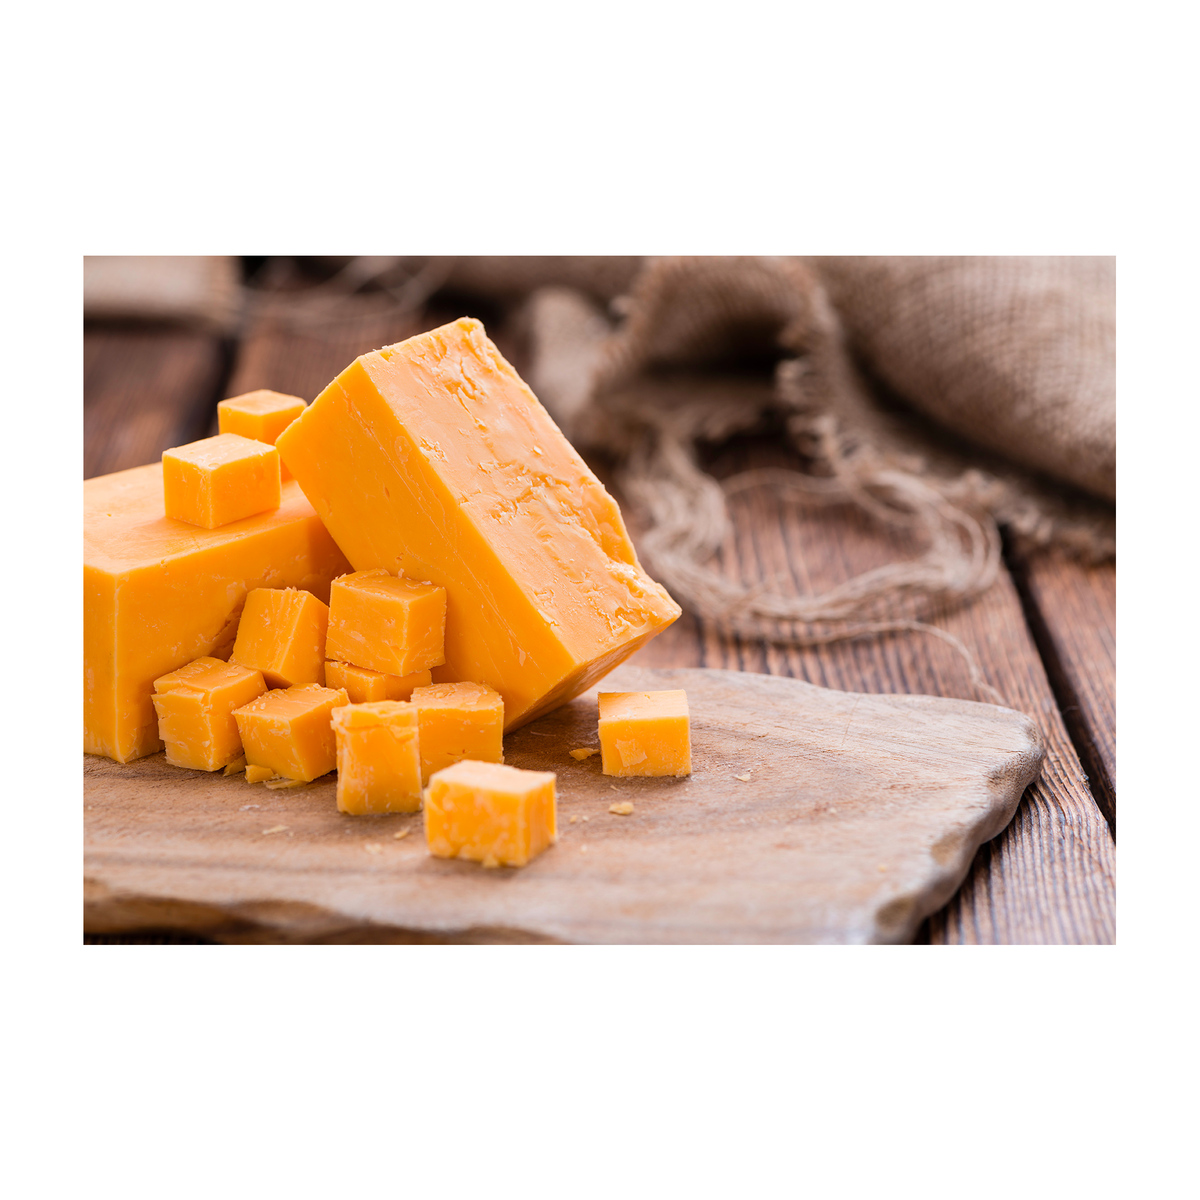 So British Mild Colored Cheddar Cheese Slices 250g Approx. Weight